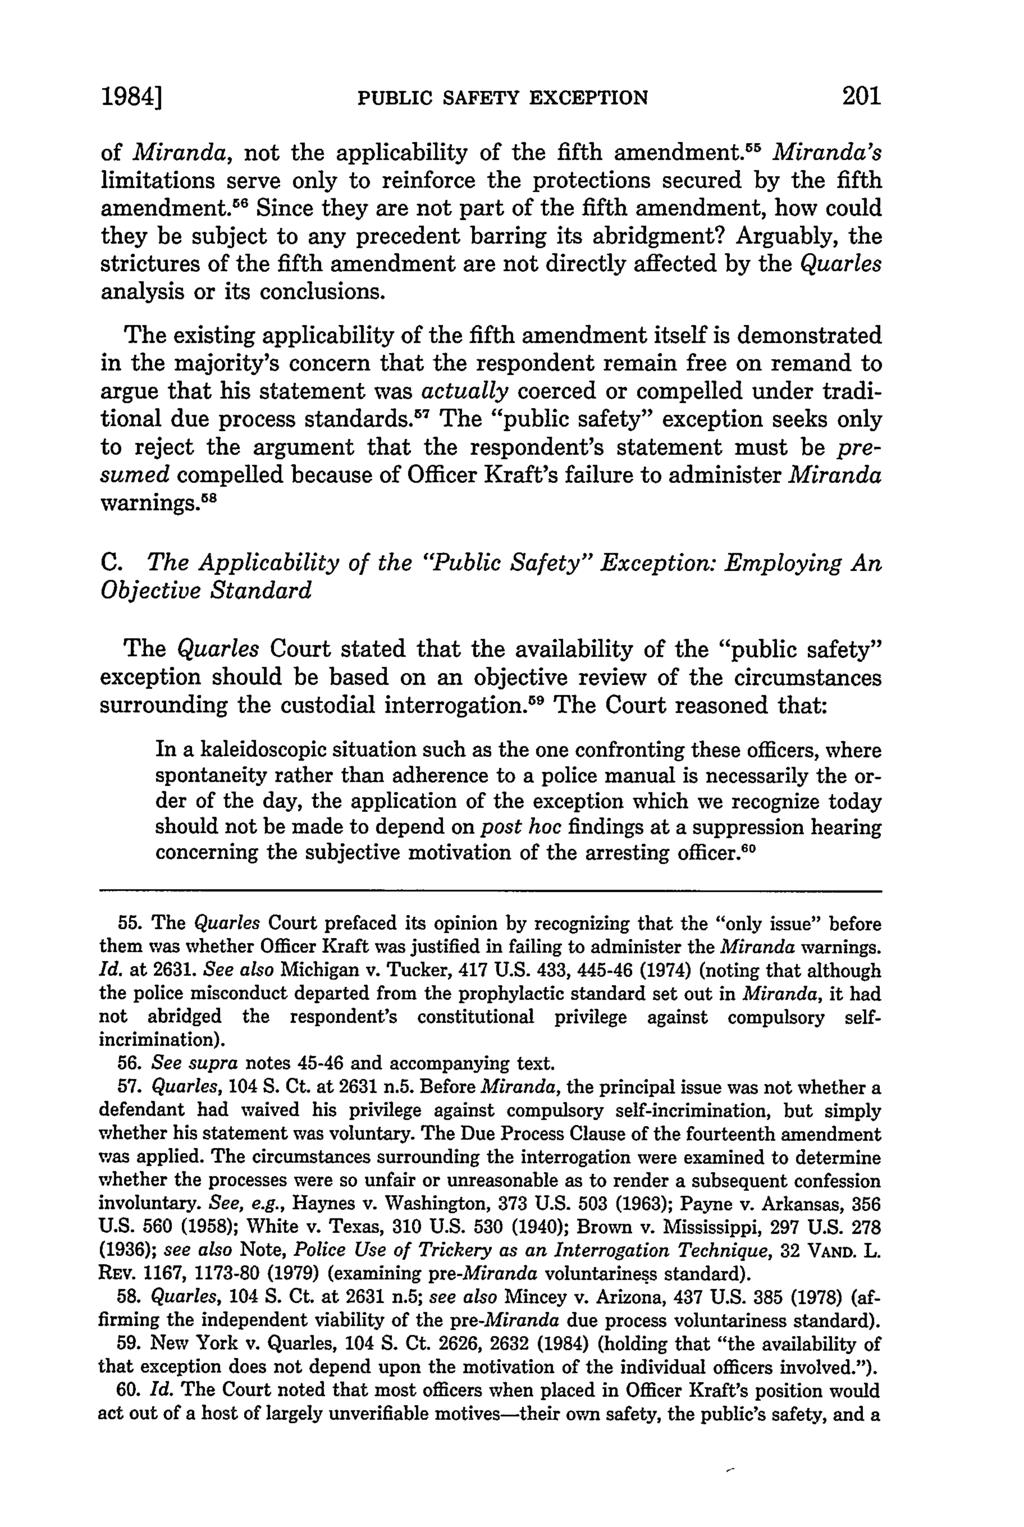 1984] PUBLIC SAFETY EXCEPTION 201 of Miranda, not the applicability of the fifth amendment. 5 Miranda's limitations serve only to reinforce the protections secured by the fifth amendment.